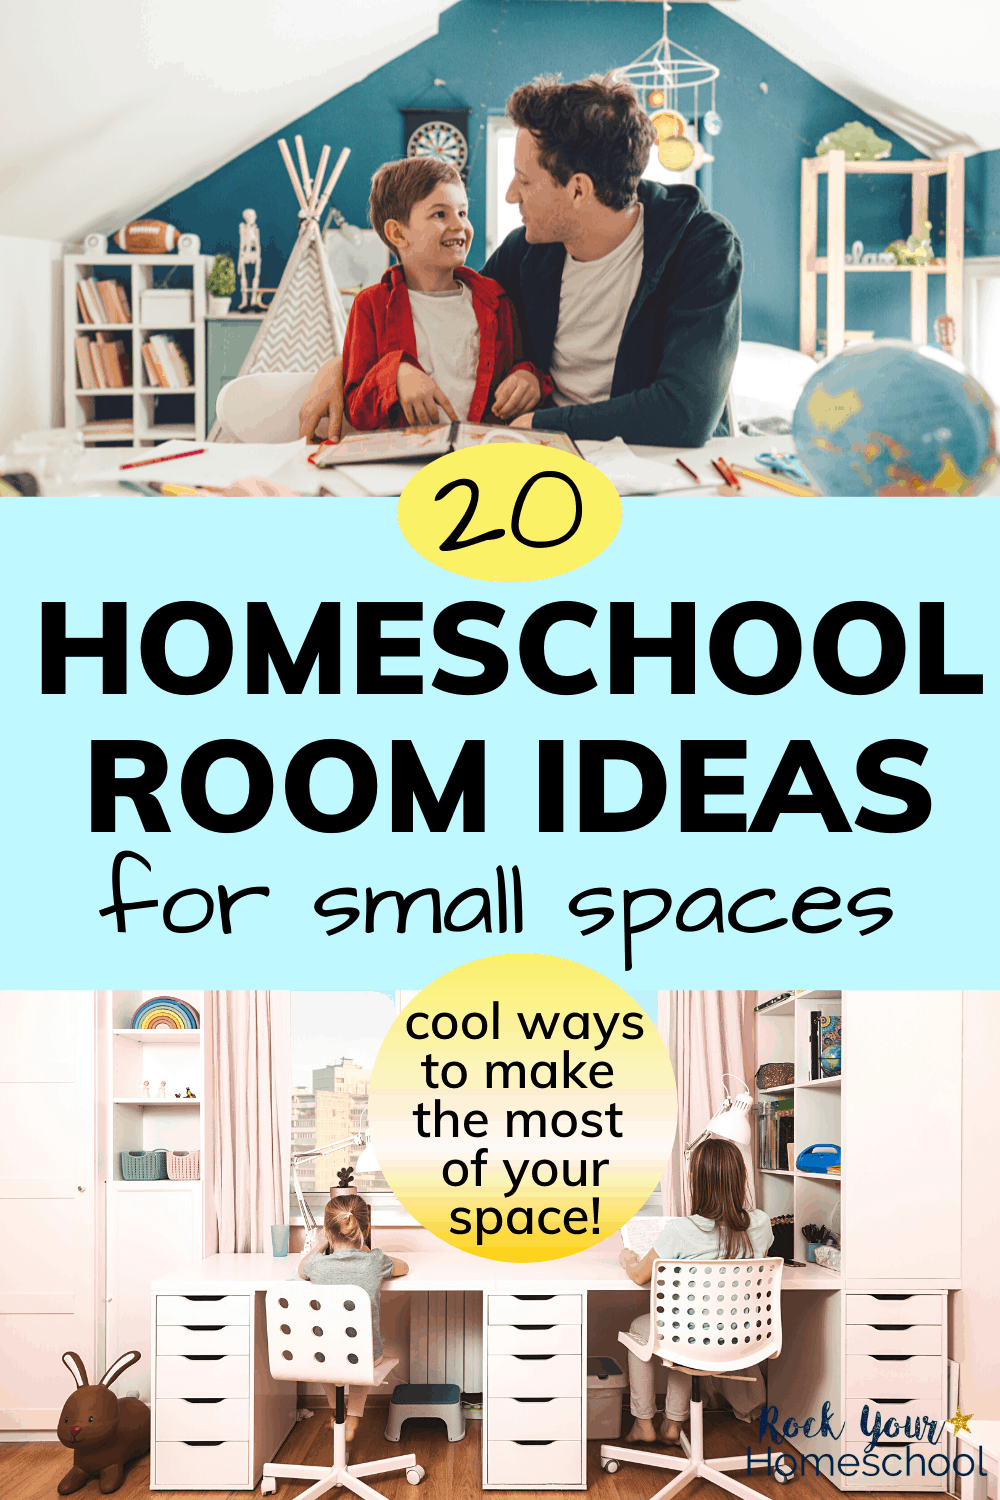 20 Simple & Creative Homeschool Room Ideas for Small Spaces